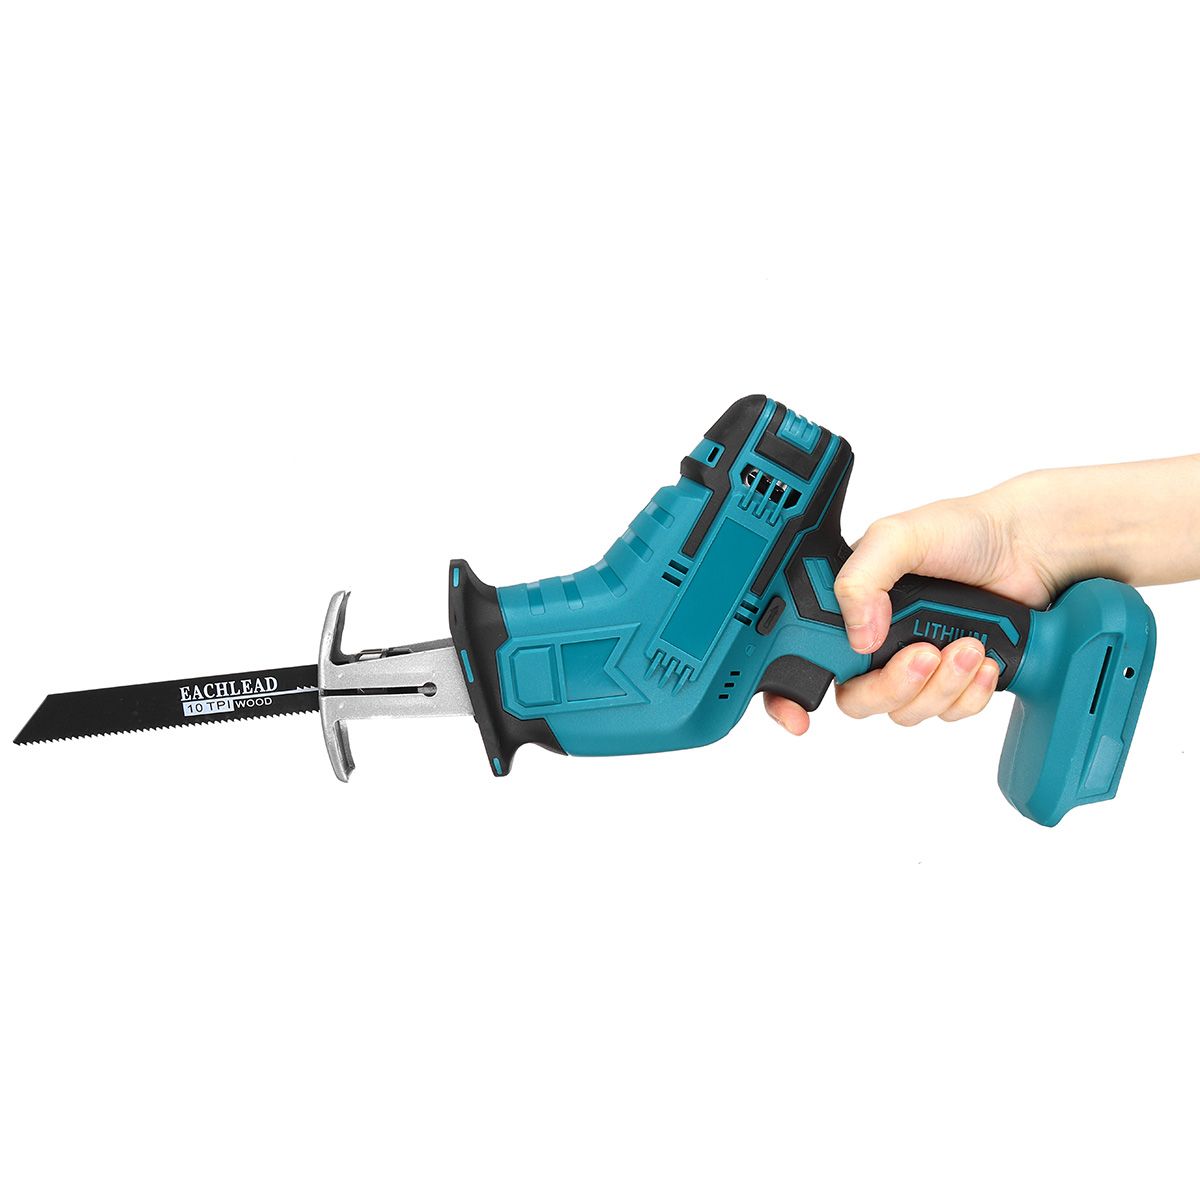 18V-10mm-Coedless-Handheld-Electric-Reciprocating-Saw-Variable-Speed-Electric-Saw-With-4X-Saw-Blades-1687358